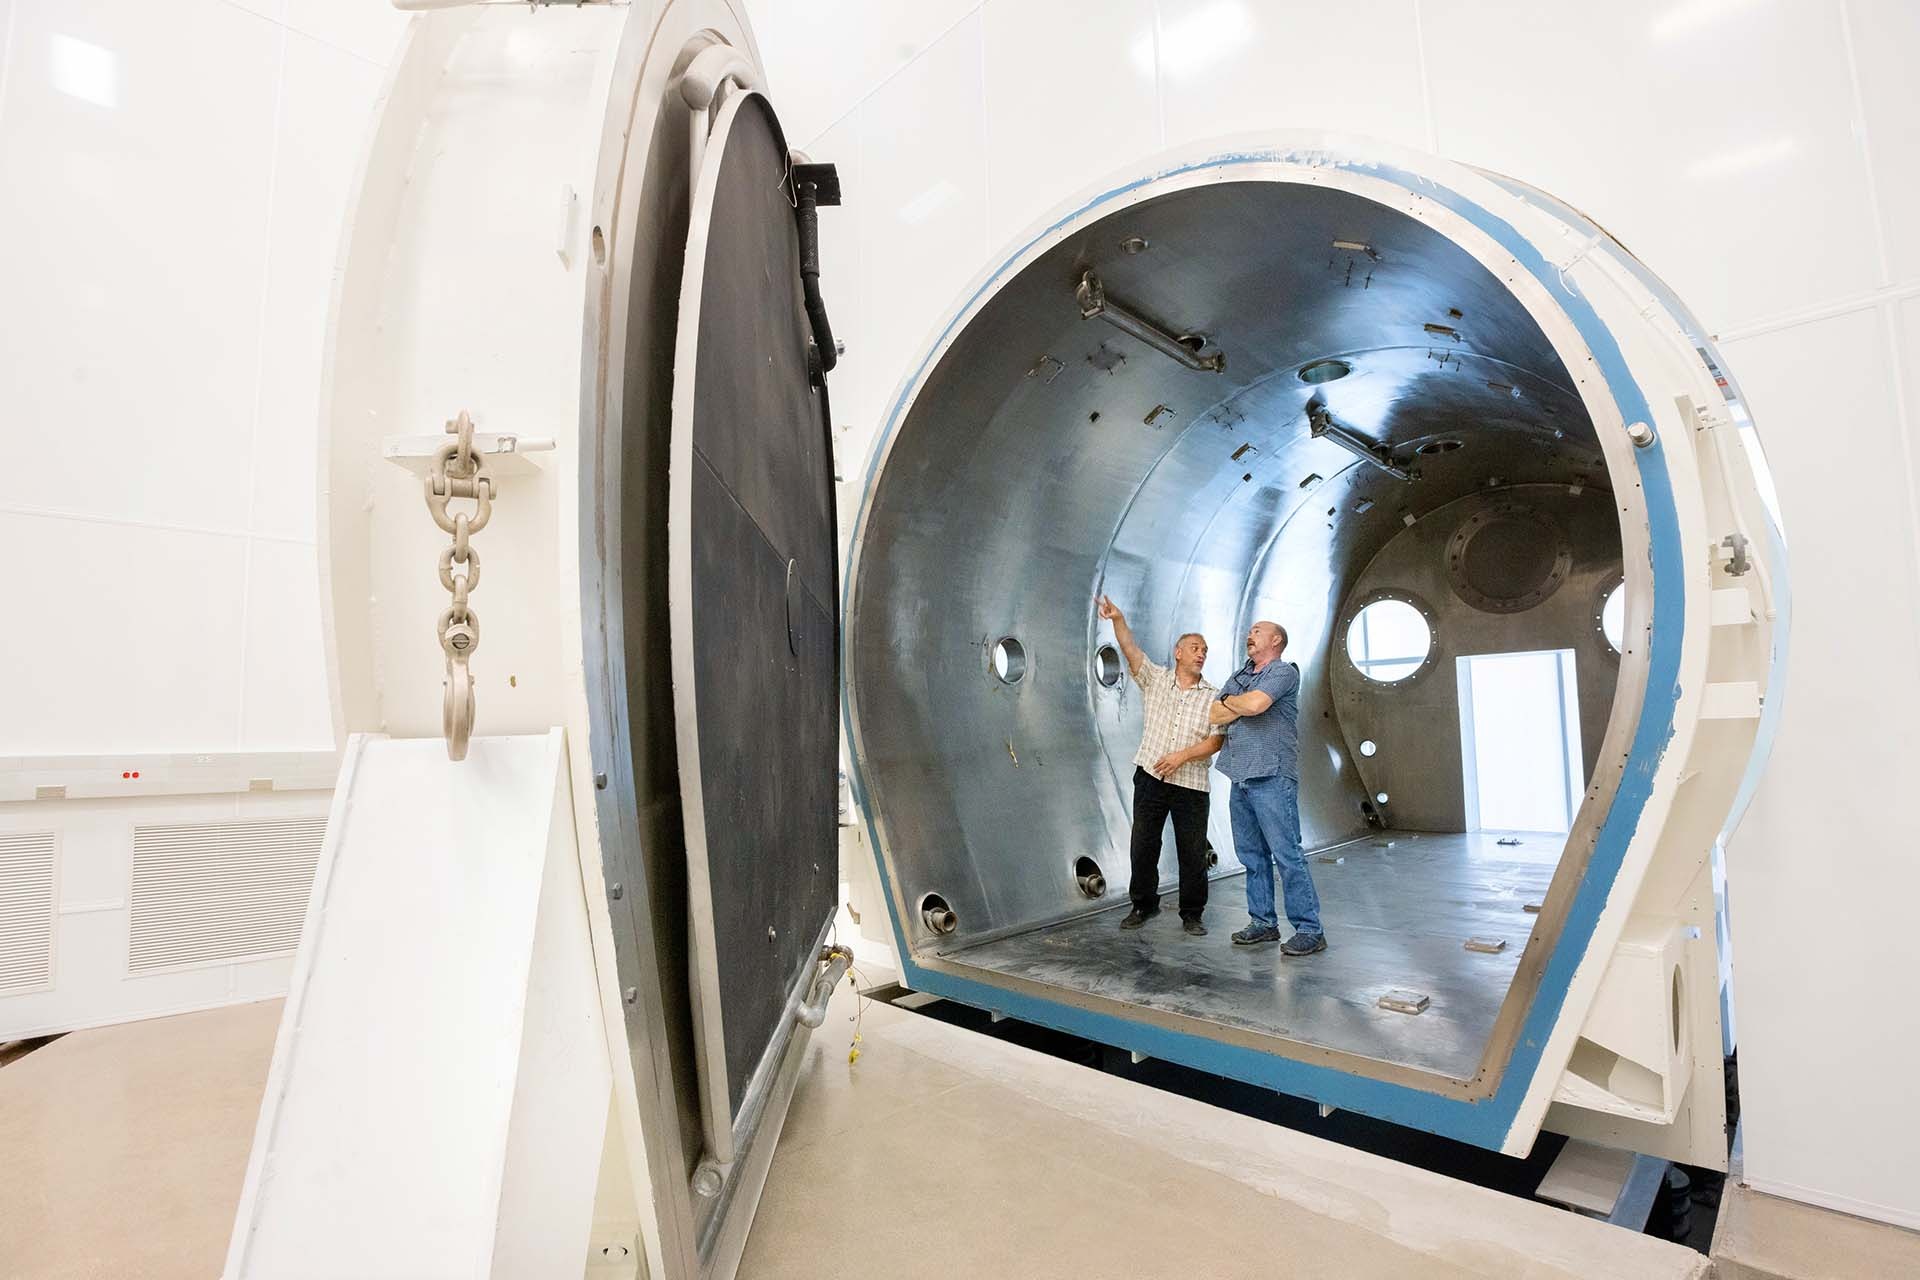 A photograph of Ruben Dominguez, a senior mechanical engineer, and Brian Duffy, a project manager in a thermal vacuum chamber